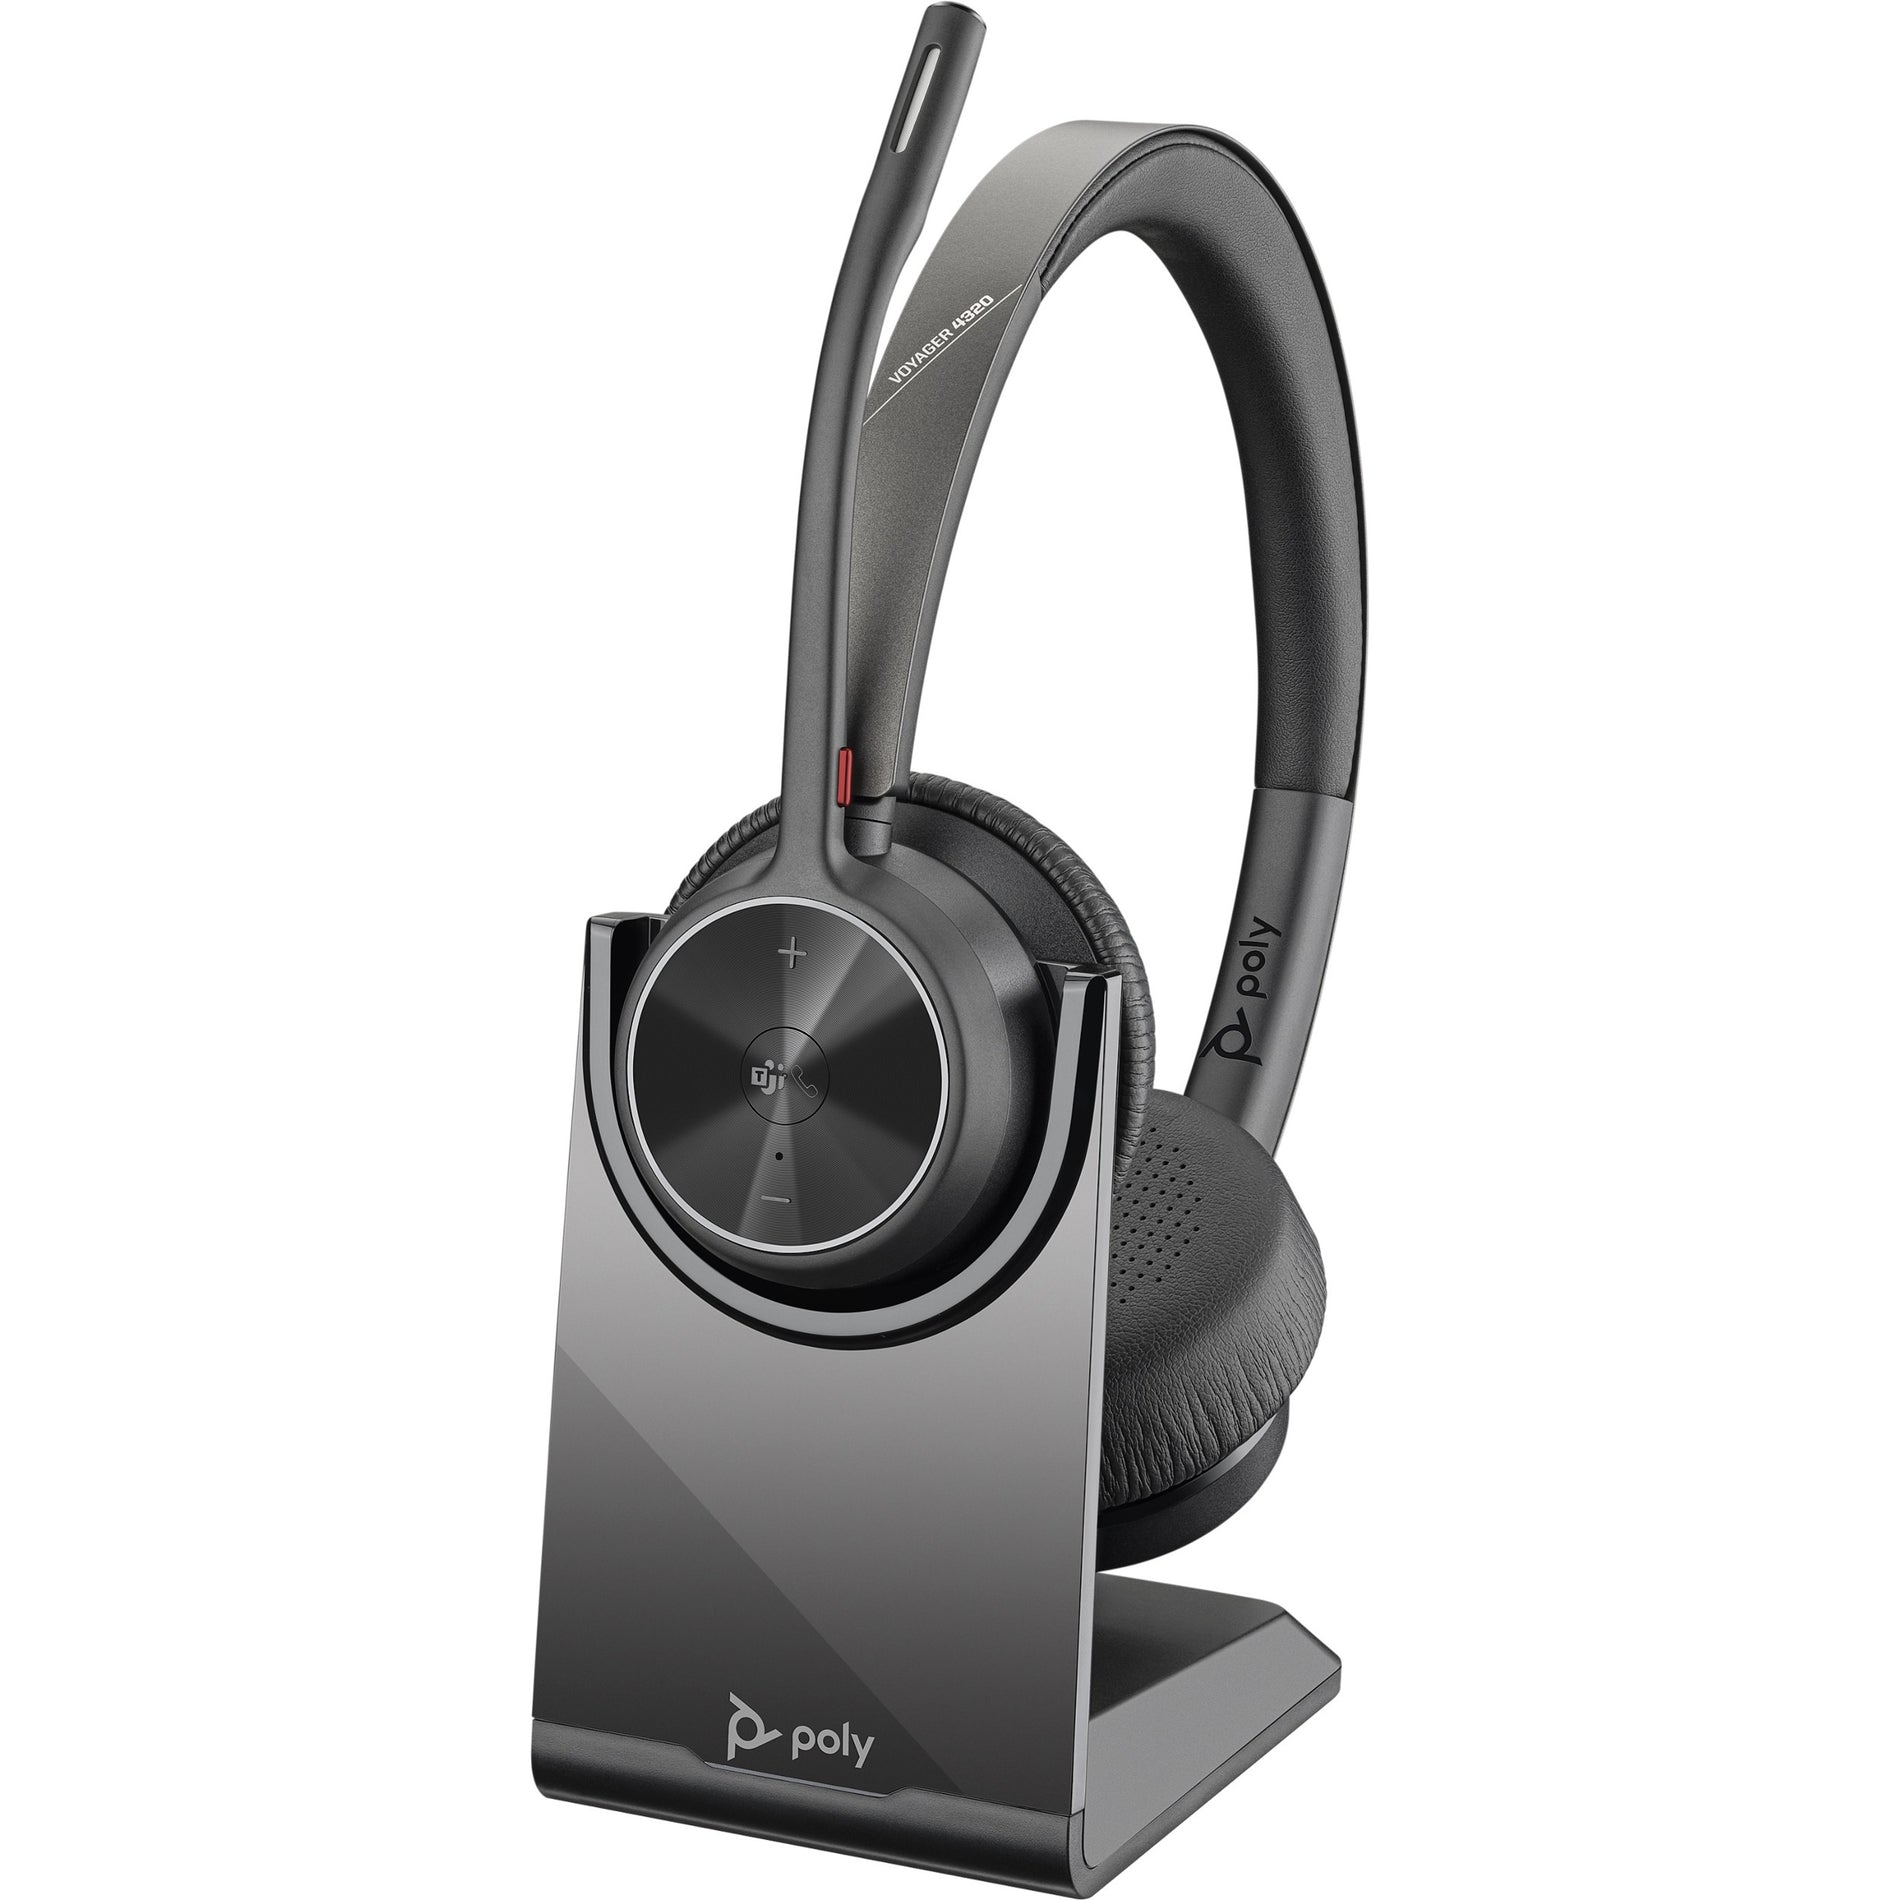 Poly Voyager 4300 UC Binaural Over-the-head Headset